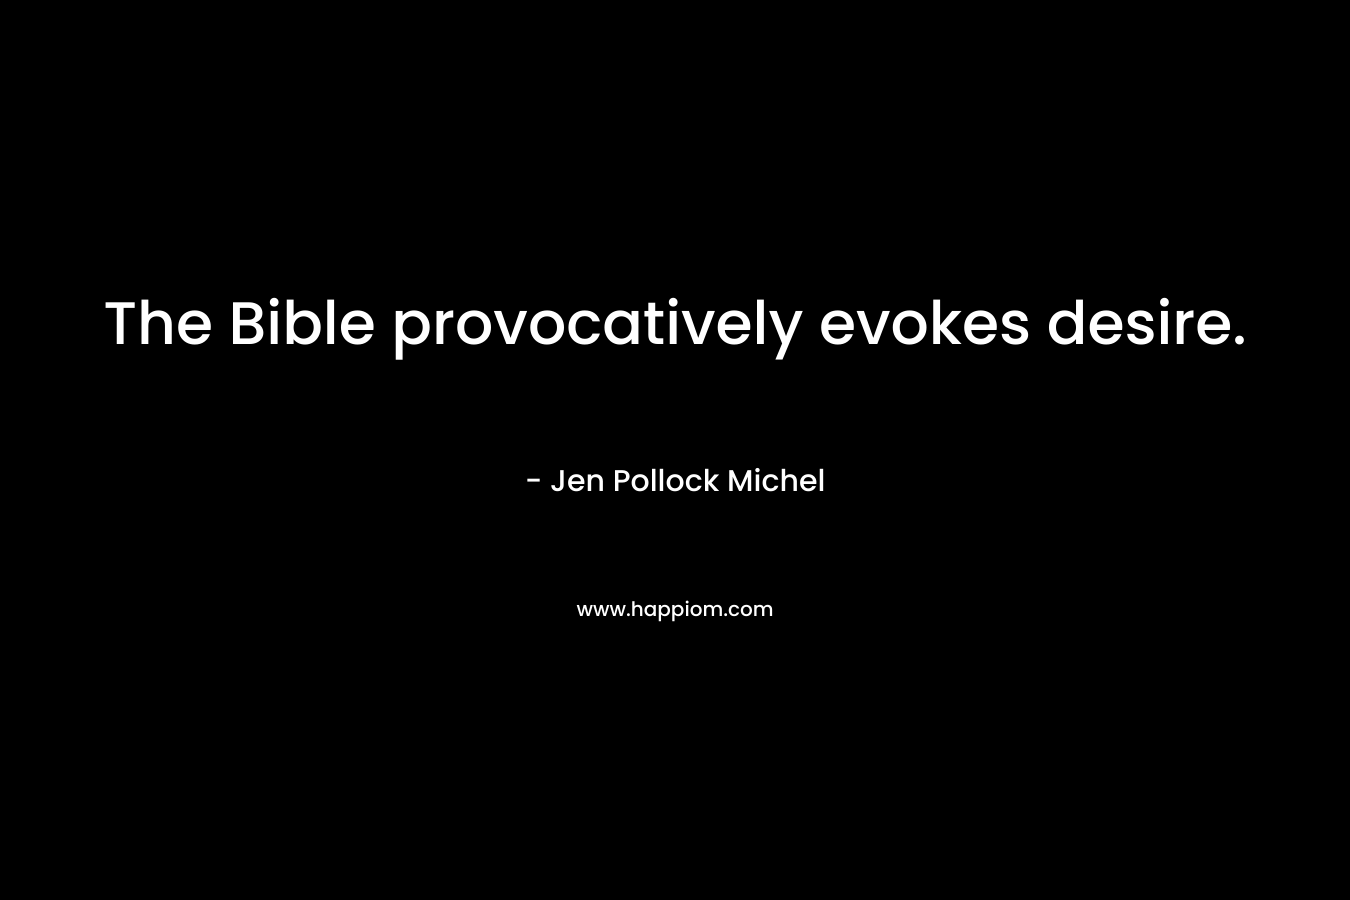 The Bible provocatively evokes desire.